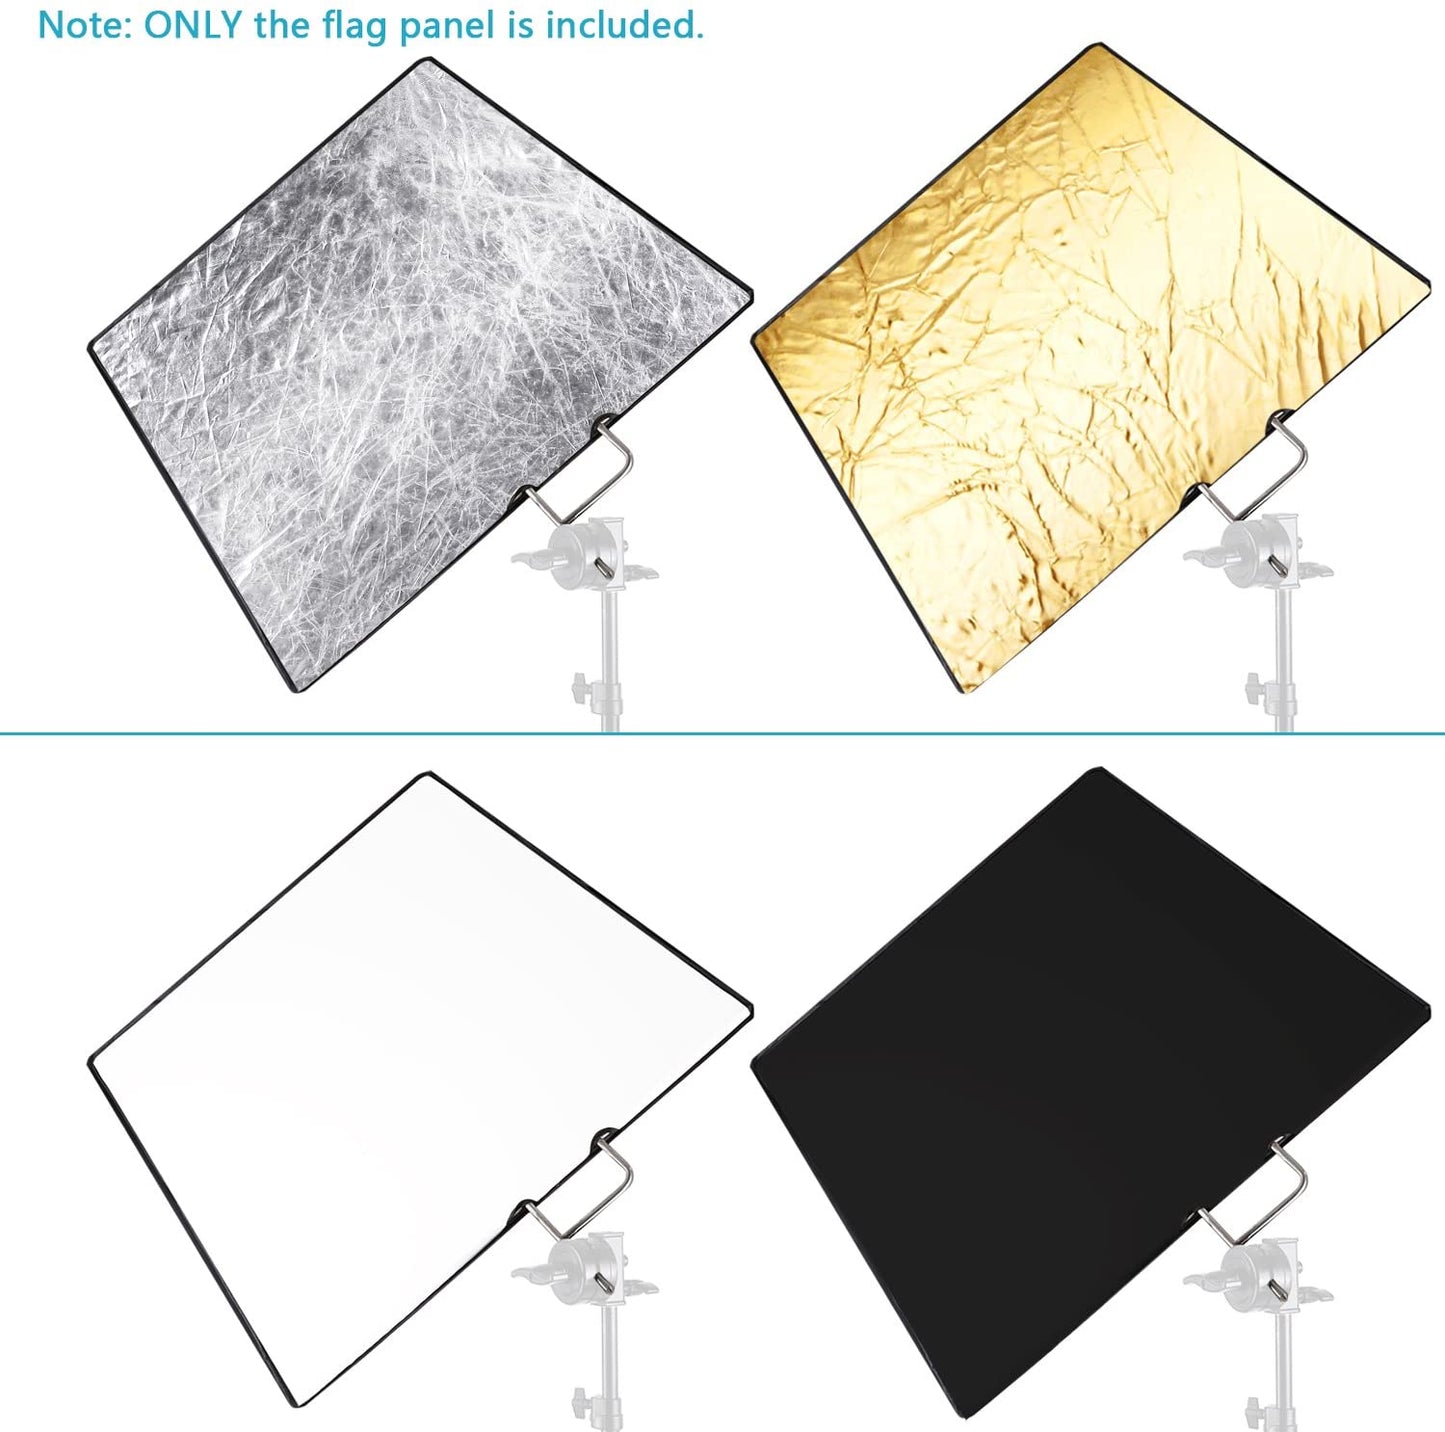 PXEL RF-7590 4-in-1 Metal Flag Panel Set Reflector with Soft White, Black, Silver and Gold Cover Cloth Scrim flag for Photo Video Studio Photography